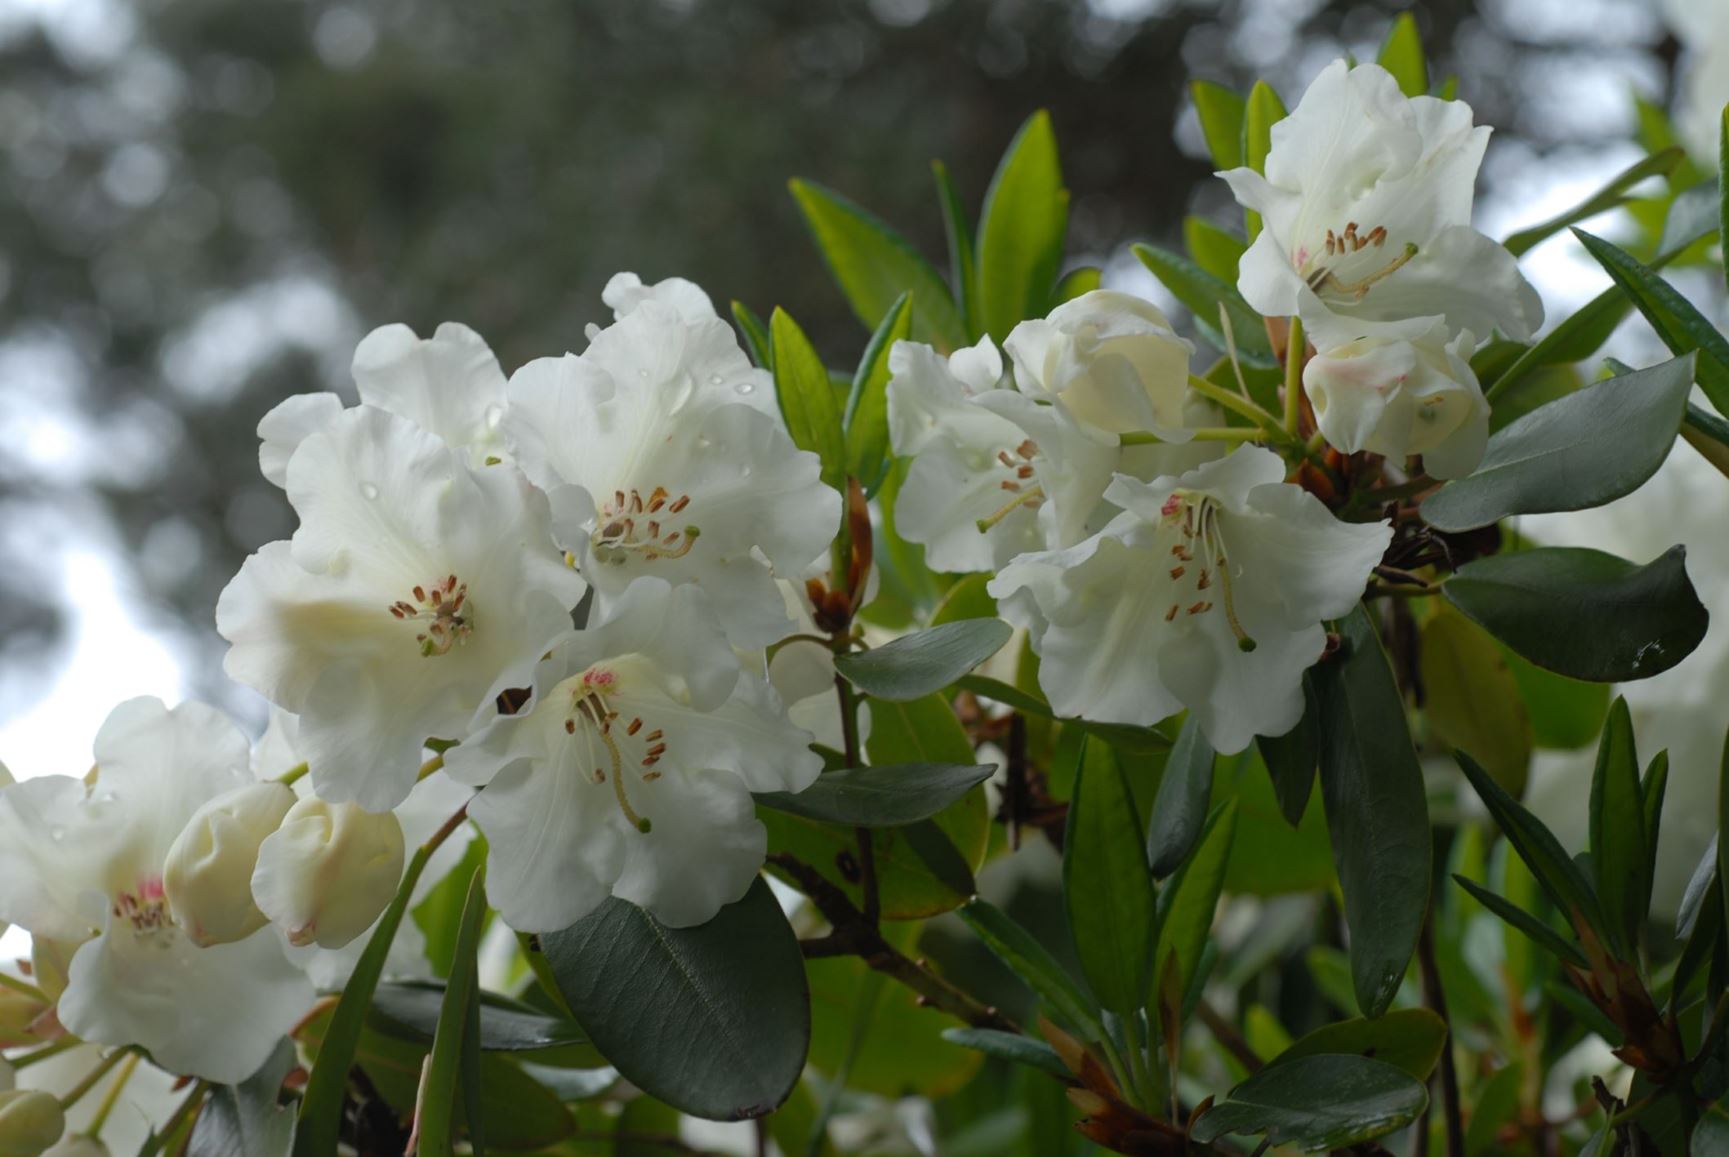 Rhododendron 'Maid of Norway'